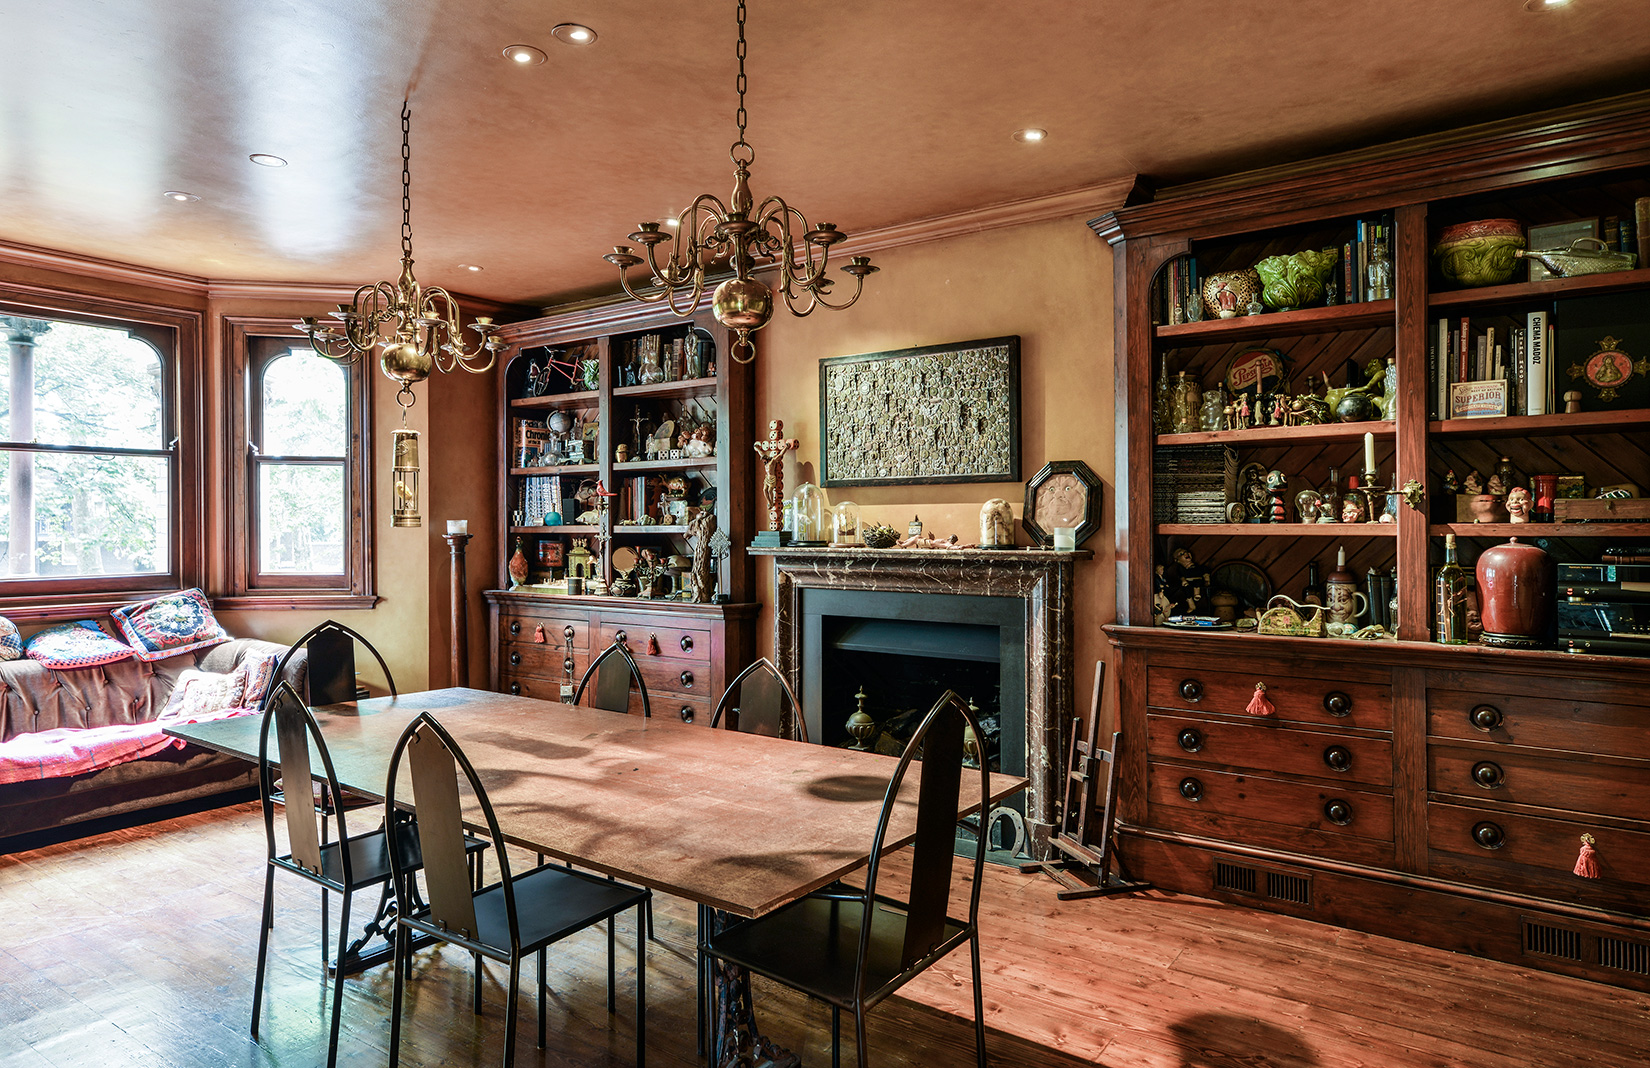 The London home and studio of the late visual artist Nancy Fouts is on sale for £3,999,950 – and it is packed full of Victorian neo-gothic details.